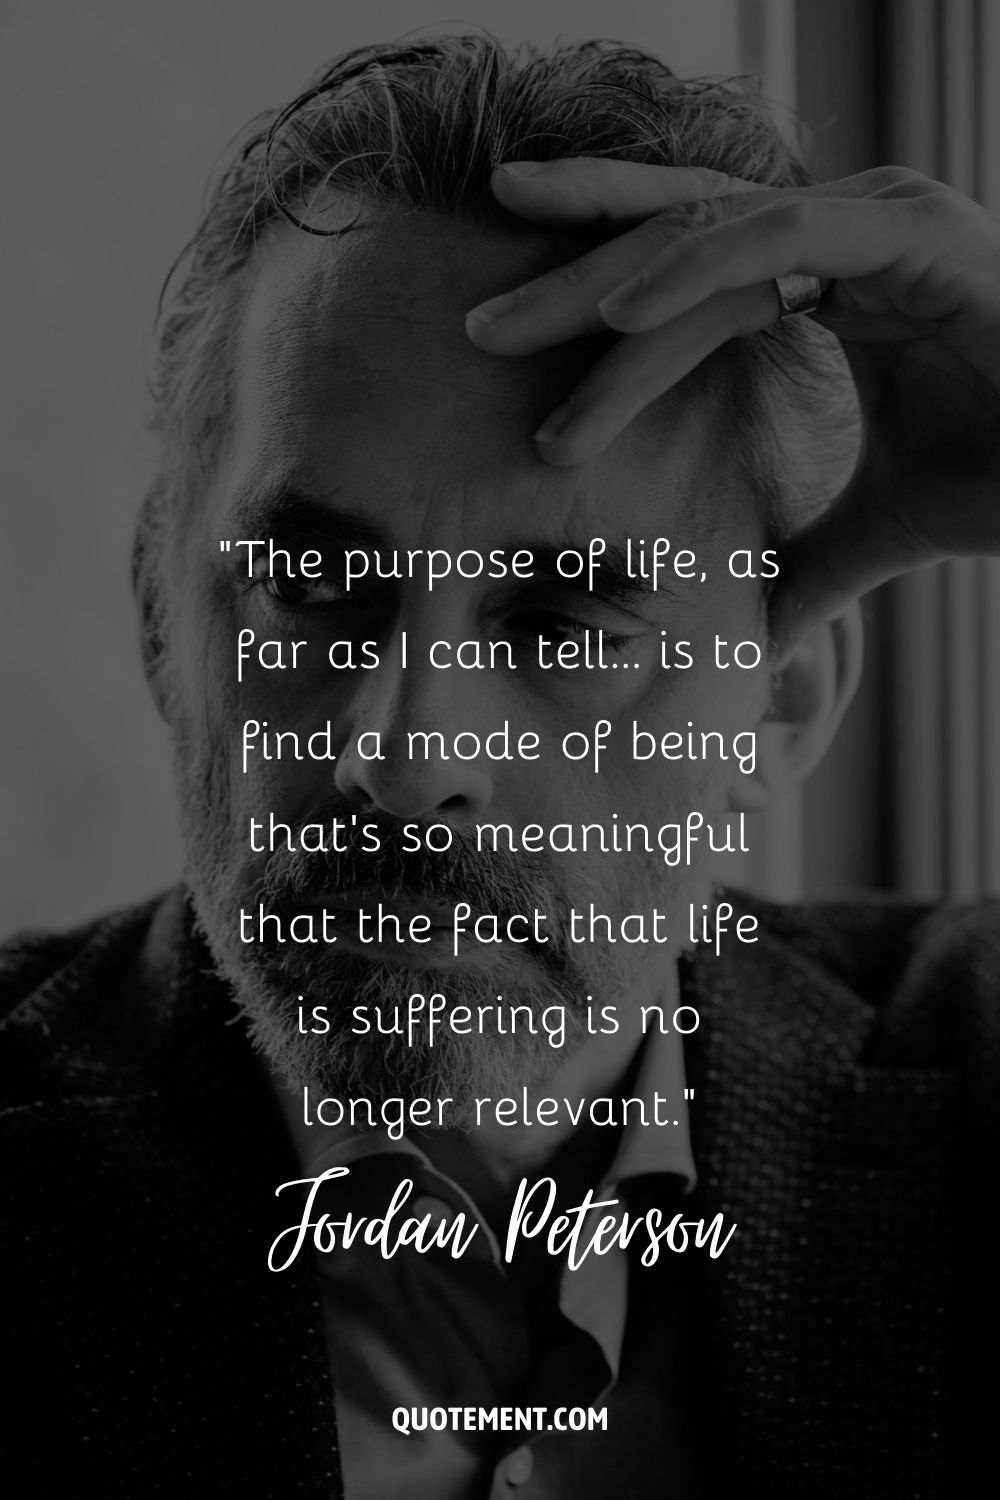 The purpose of life, as far as I can tell… is to find a mode of being that’s so meaningful that the fact that life is suffering is no longer relevant